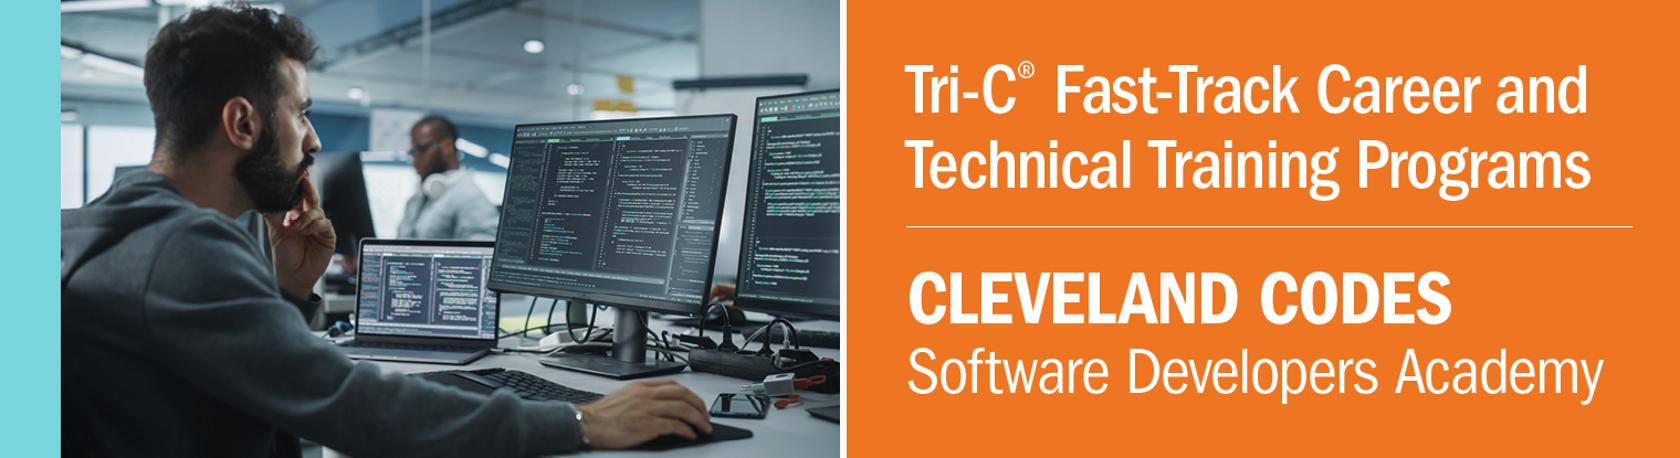 Tri-C Fast-Track Career and Technical Training Programs Cleveland Codes Software Developers Academy